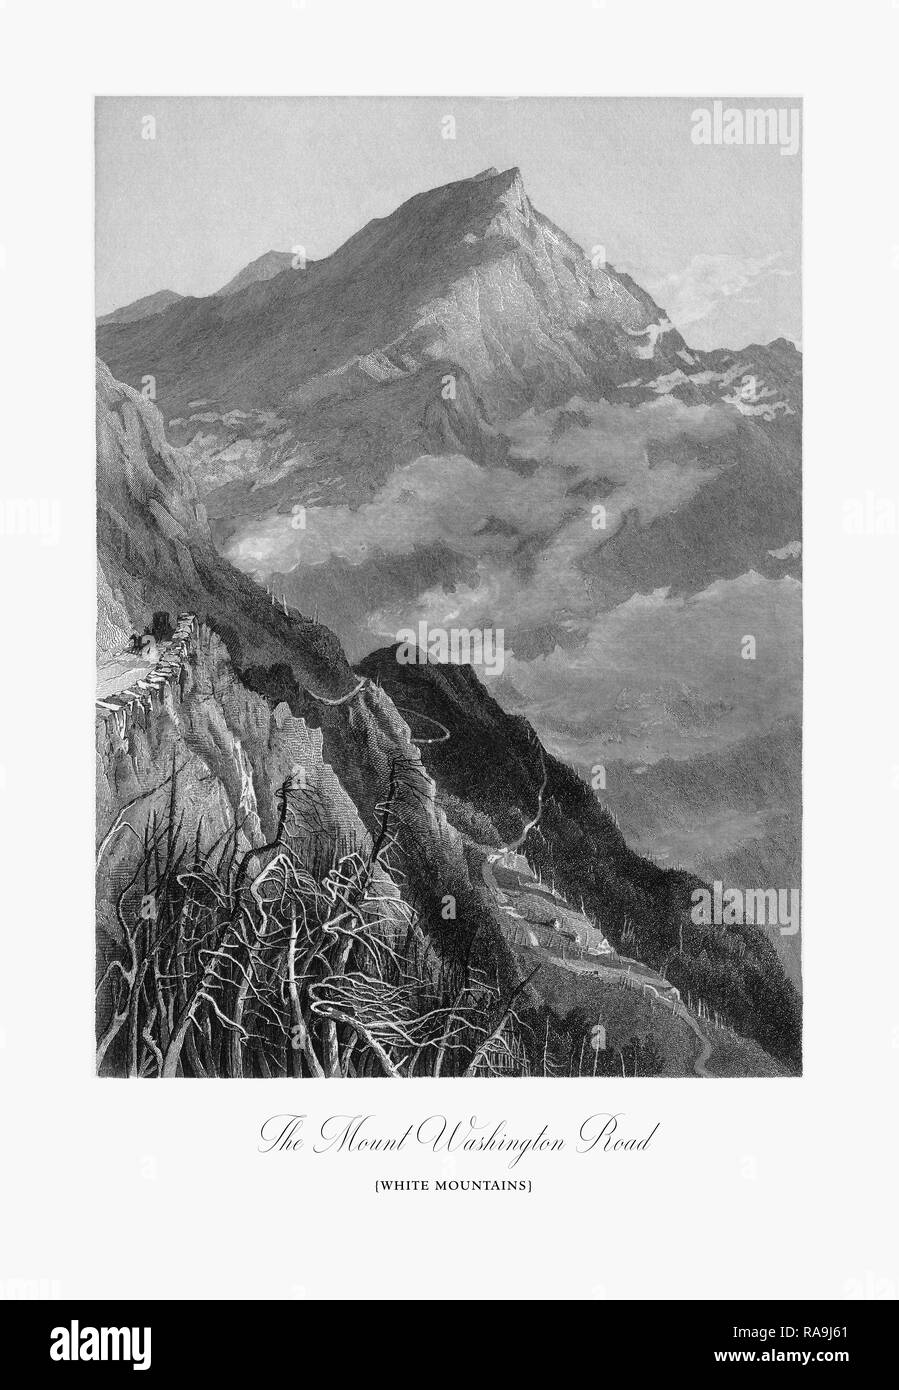 Le mont Washington Road, White Mountains, New Hampshire, United States, American Victorian gravure, 1872 Banque D'Images